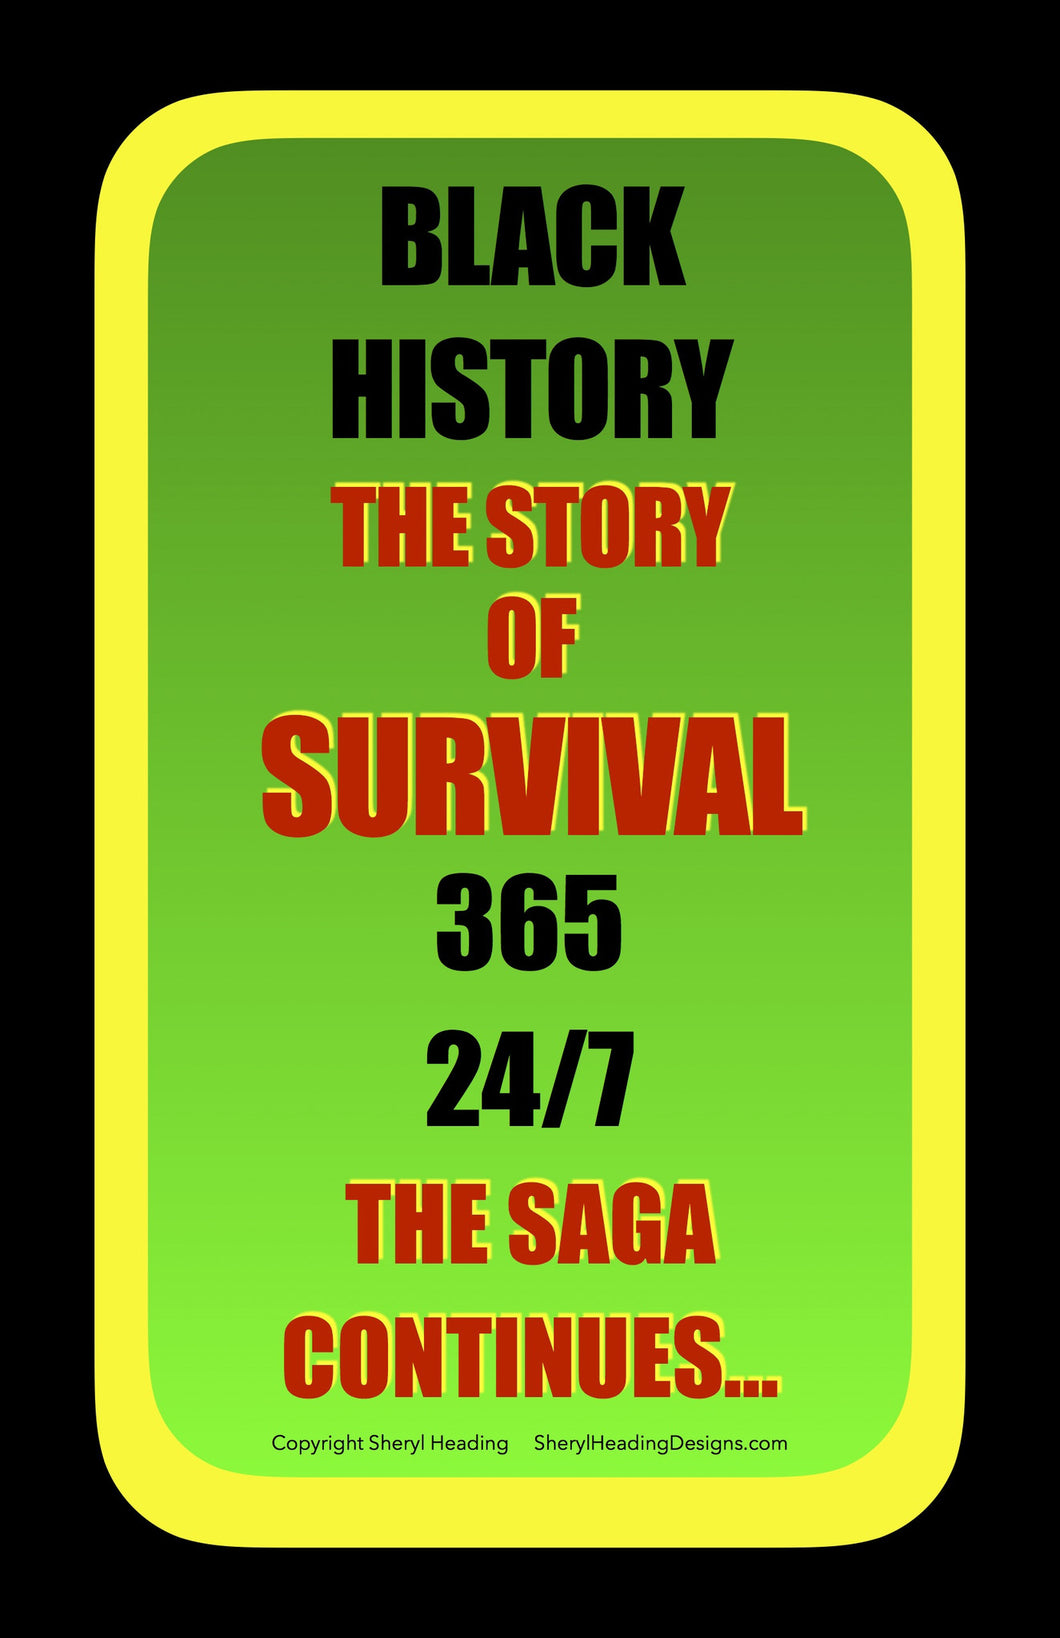 Black History The Story of Survival 365 24/7 The Saga Continues... Poster - Sheryl Heading Designs